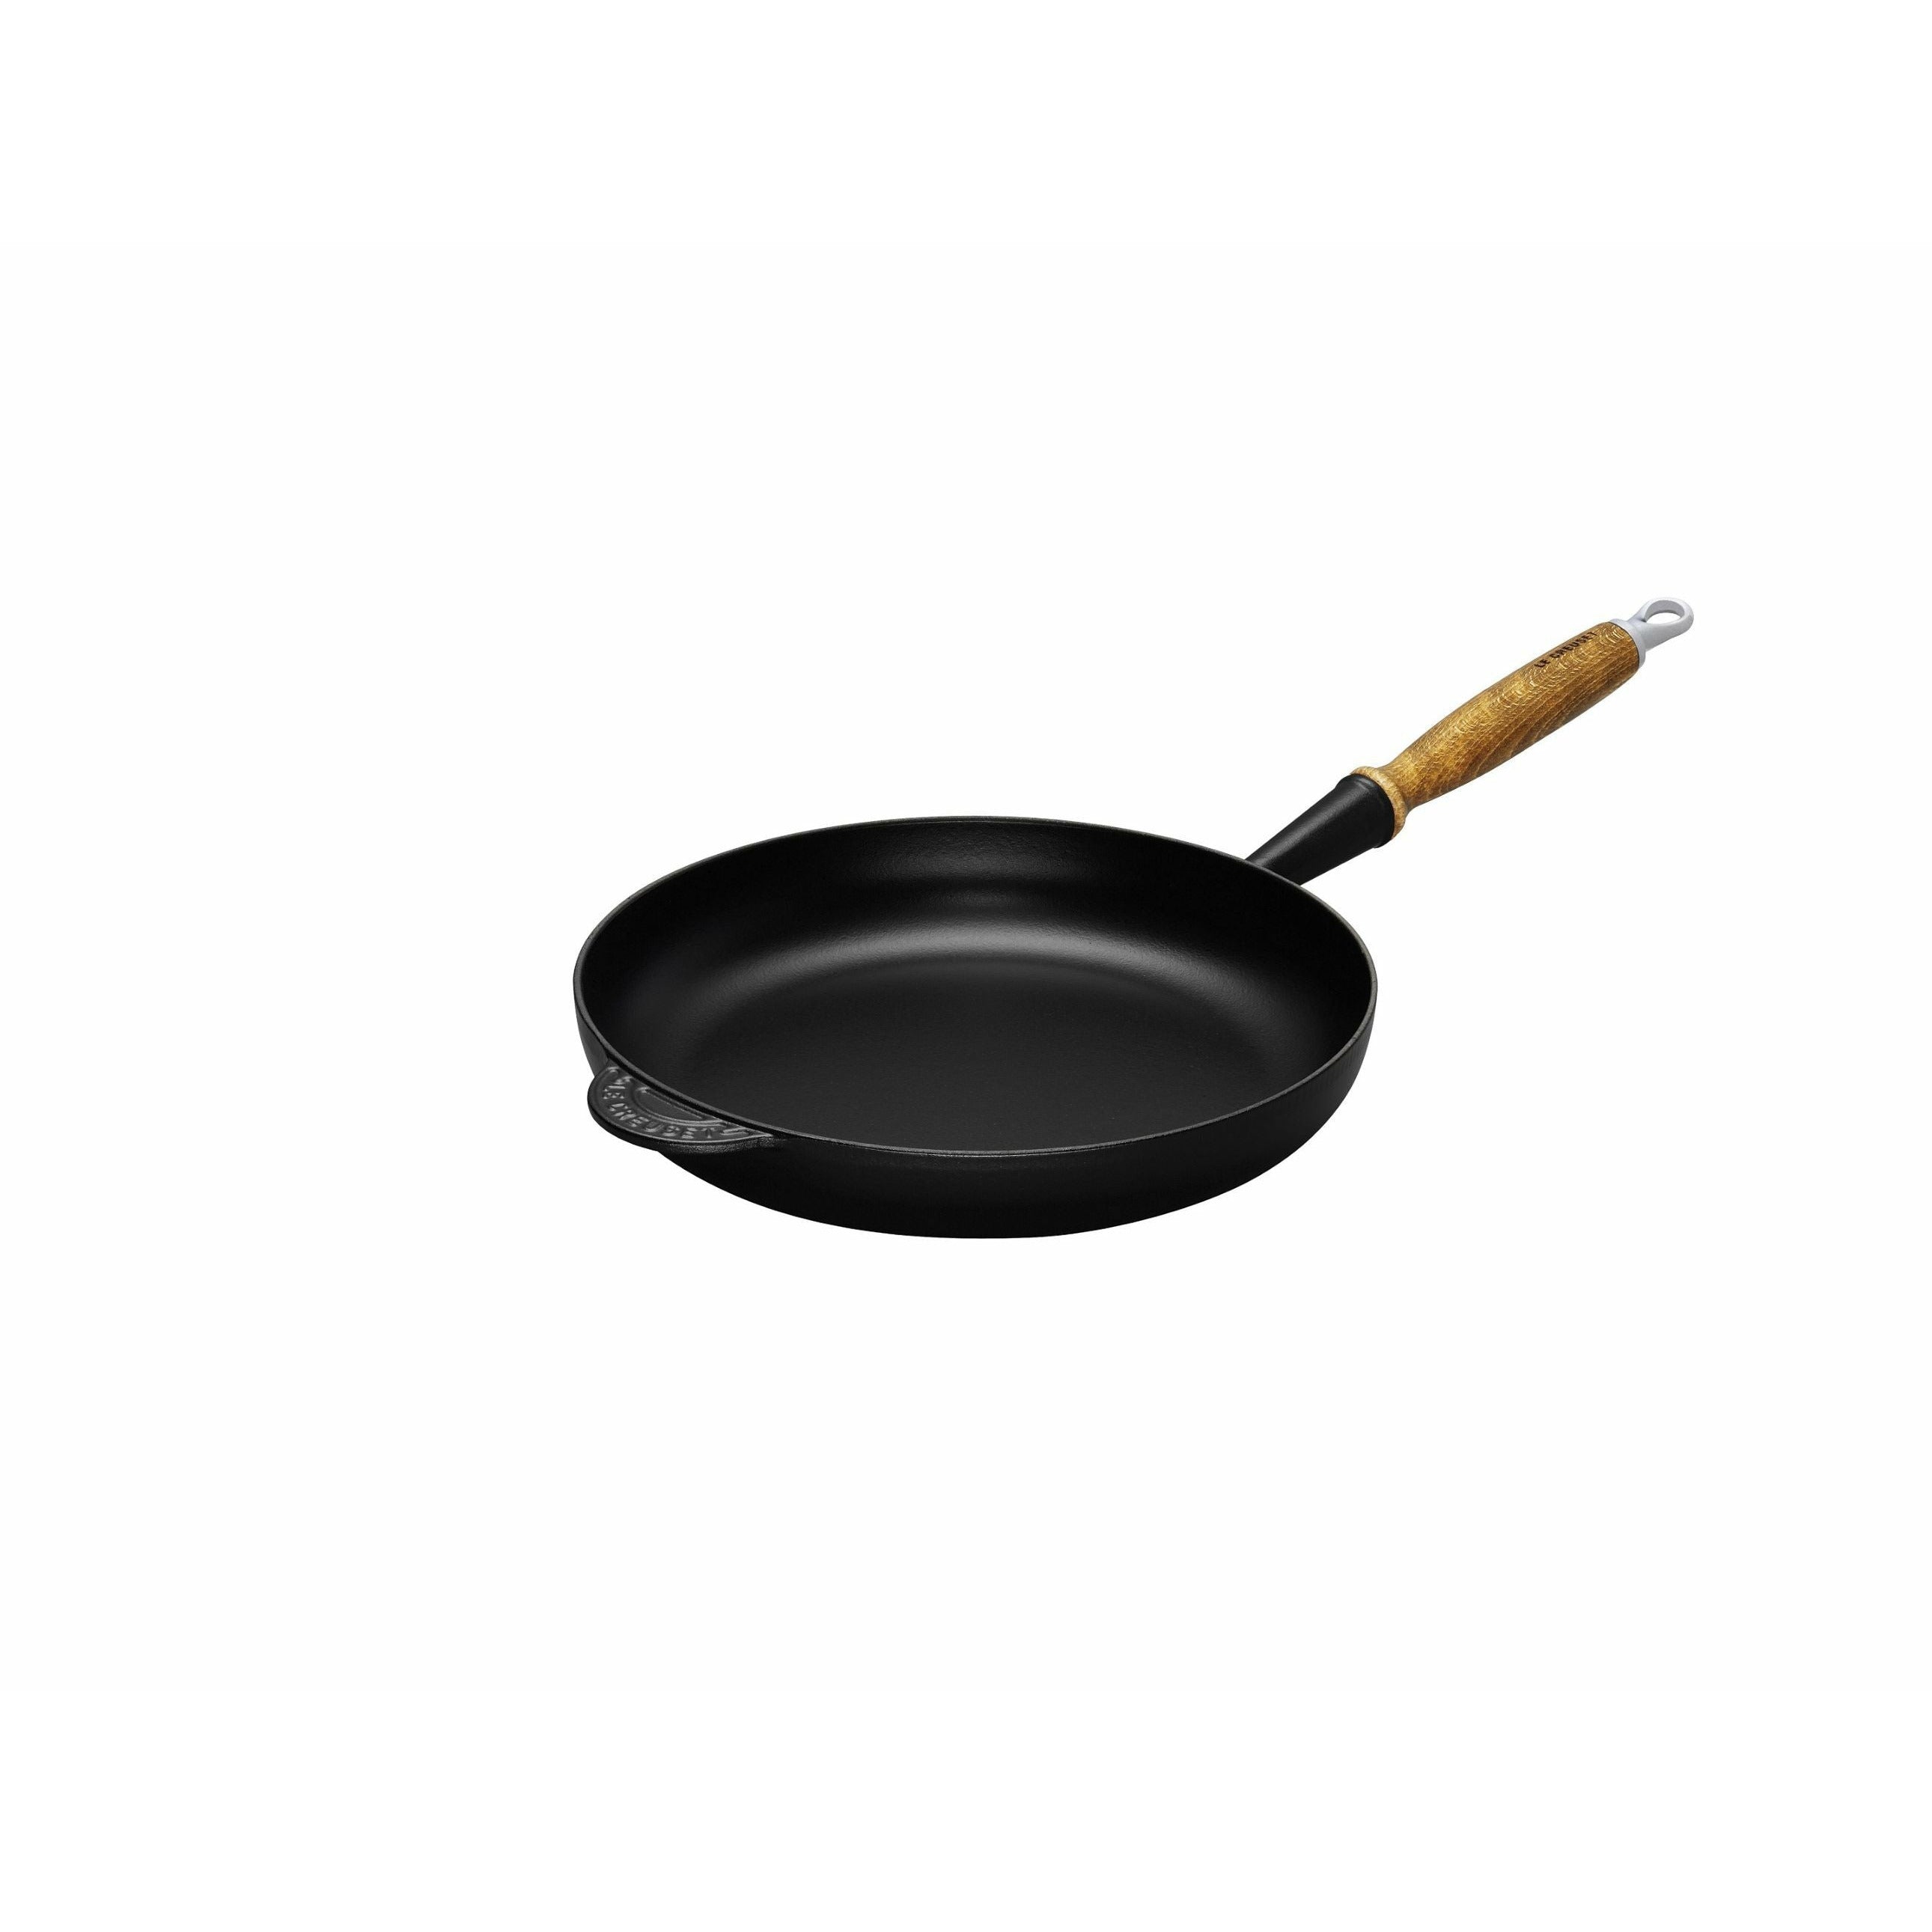 Le Creuset Tradition Frying Pan With Wooden Handle 24 Cm, Black